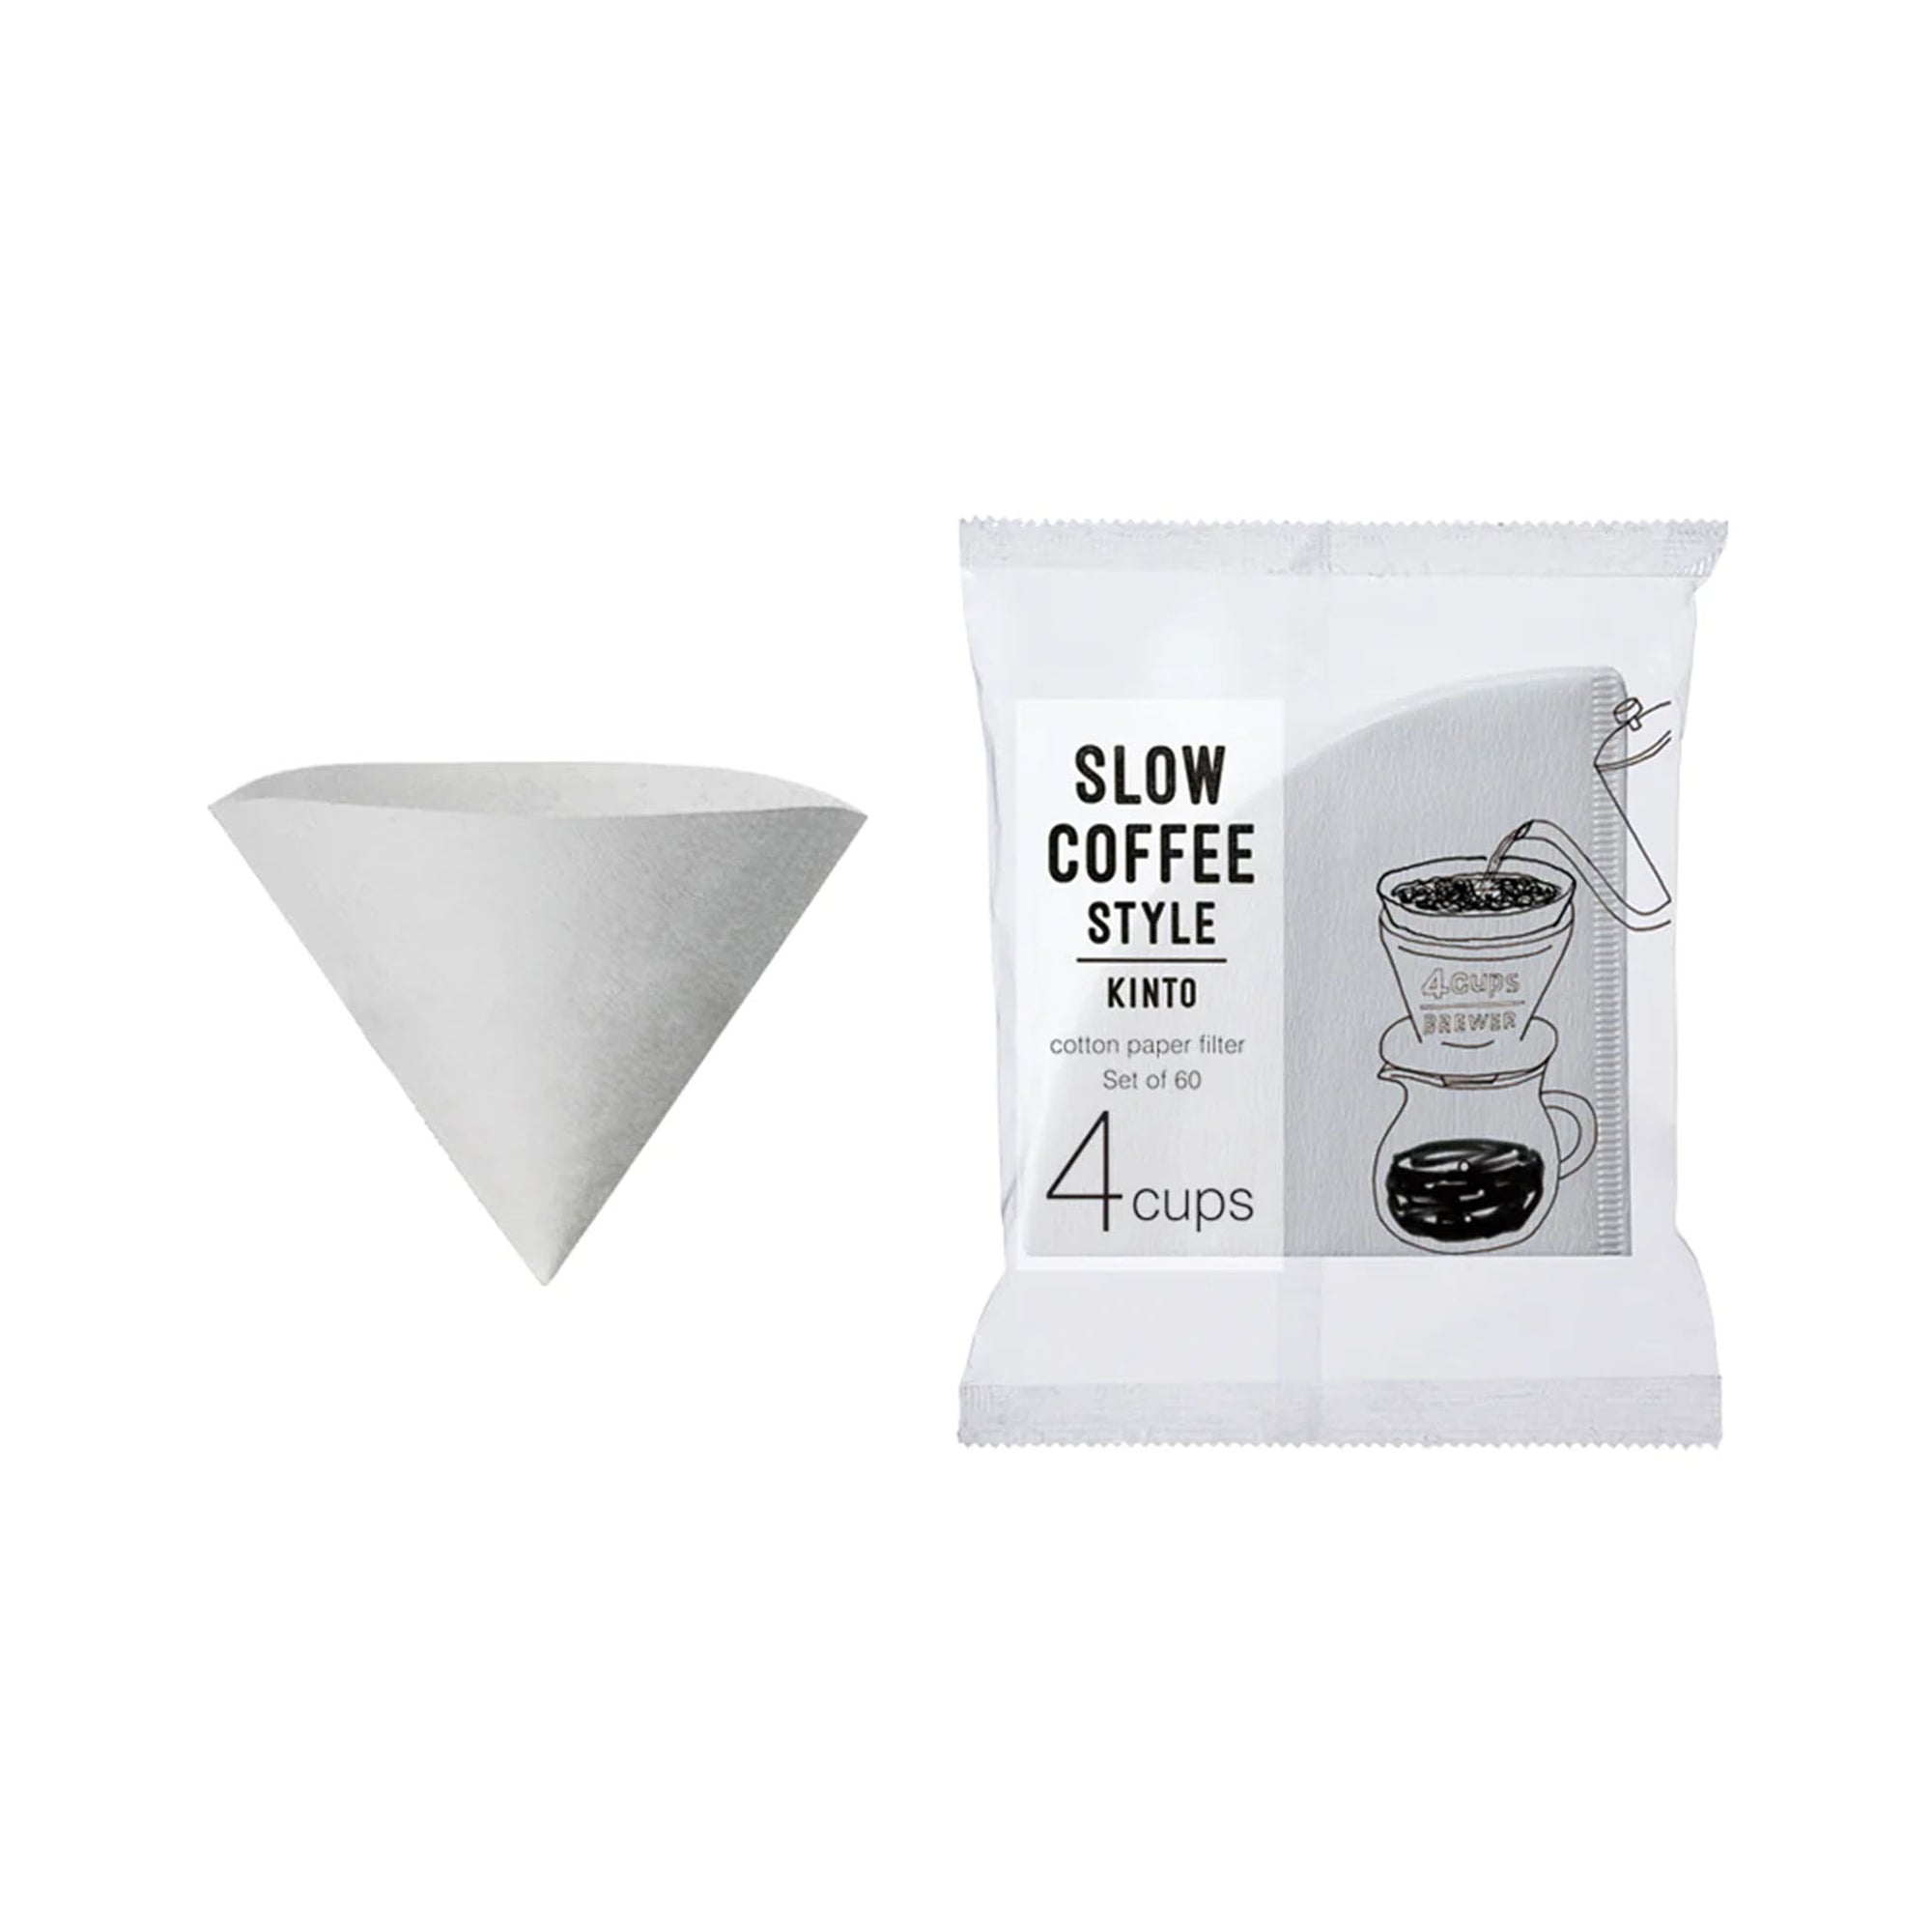 60 Cotton Paper Filter 4 cups - Kinto